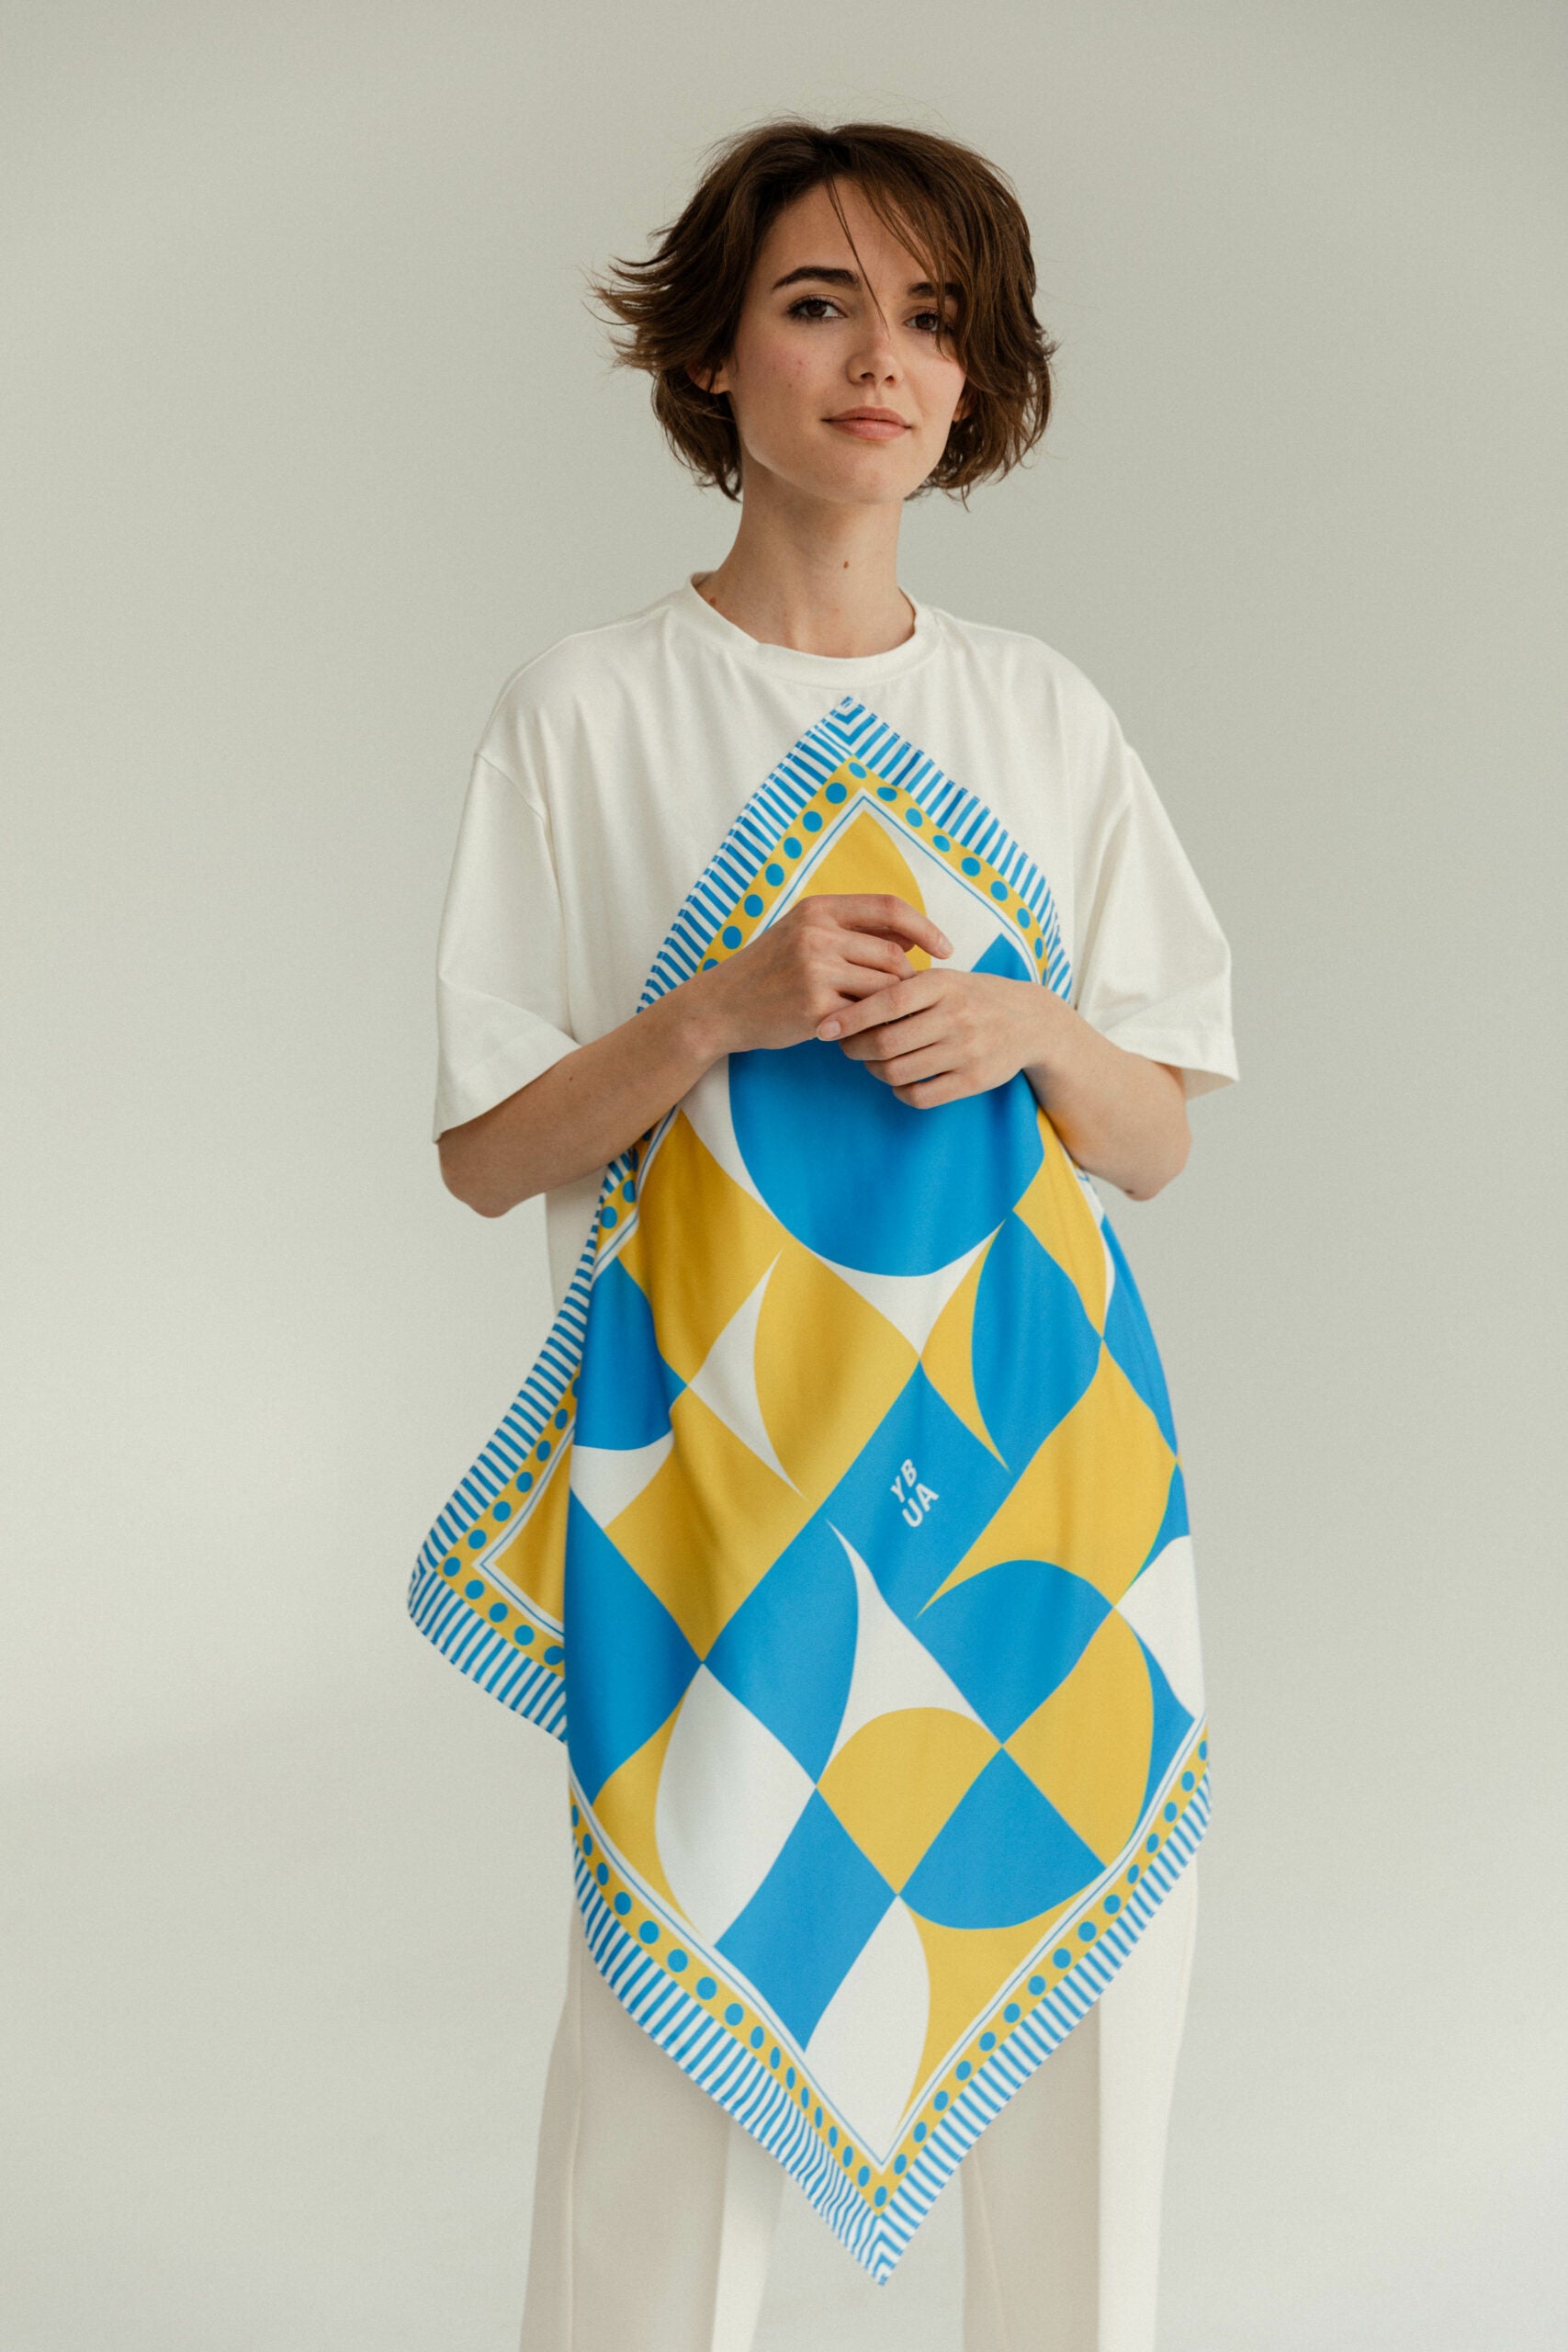 T-shirt with a yellow and blue scarf